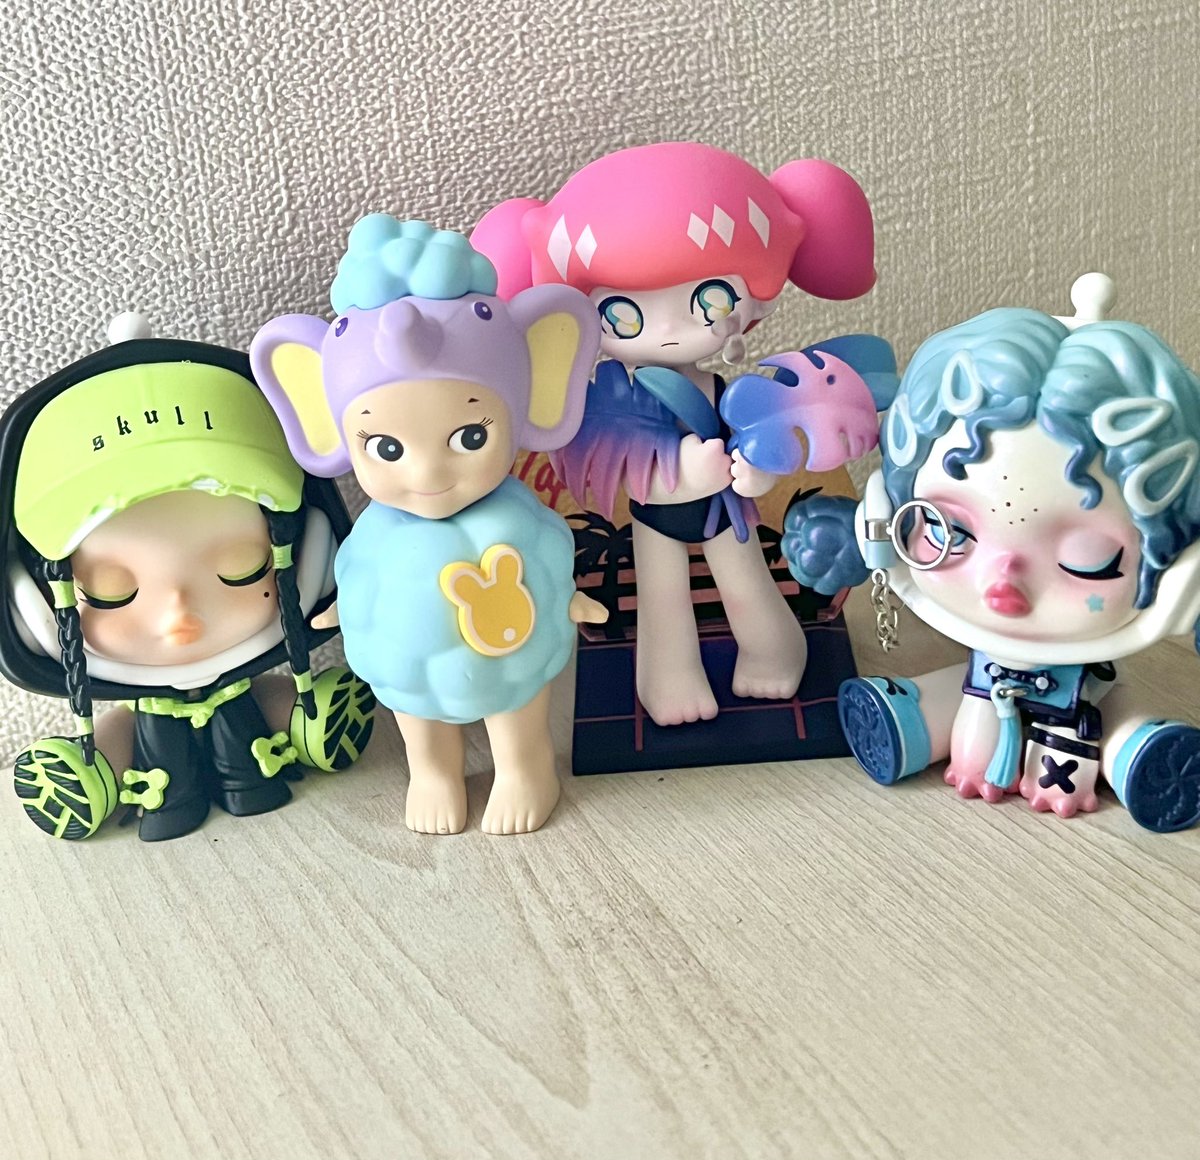 my collection is growing😮‍💨🥹